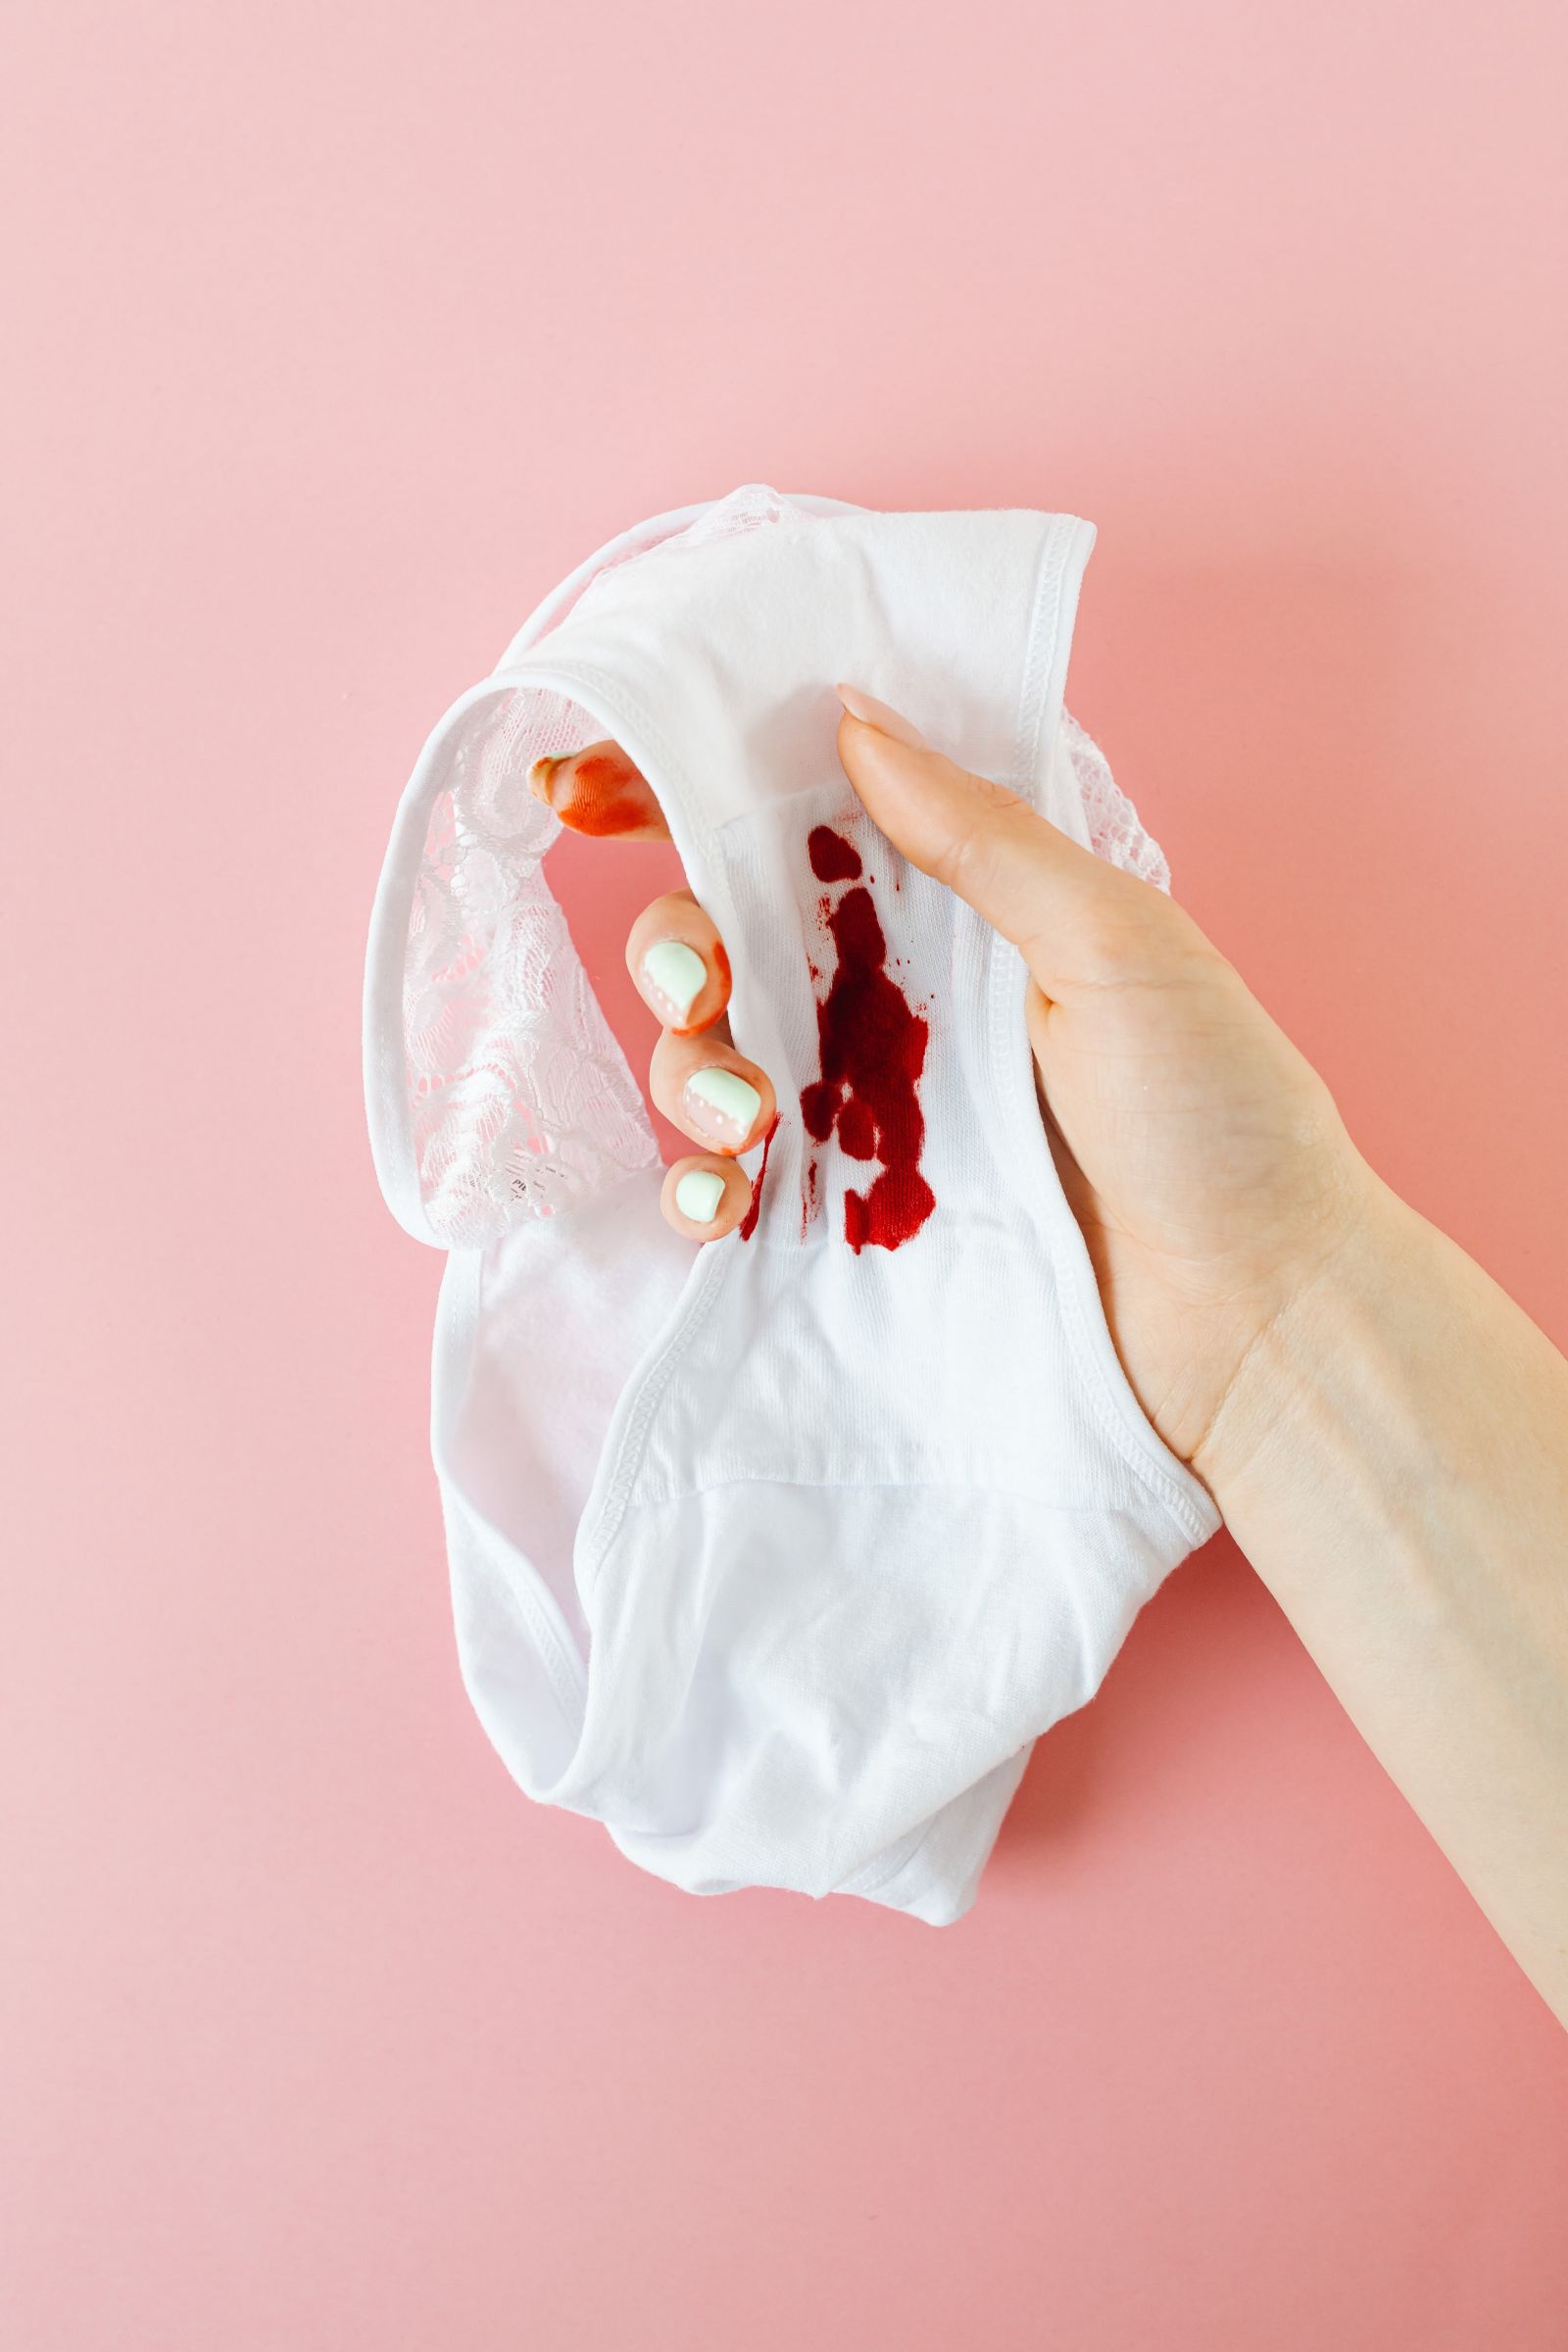 How to Combat Tampon Leaking & Starting Your Period Without Menstrual  Products